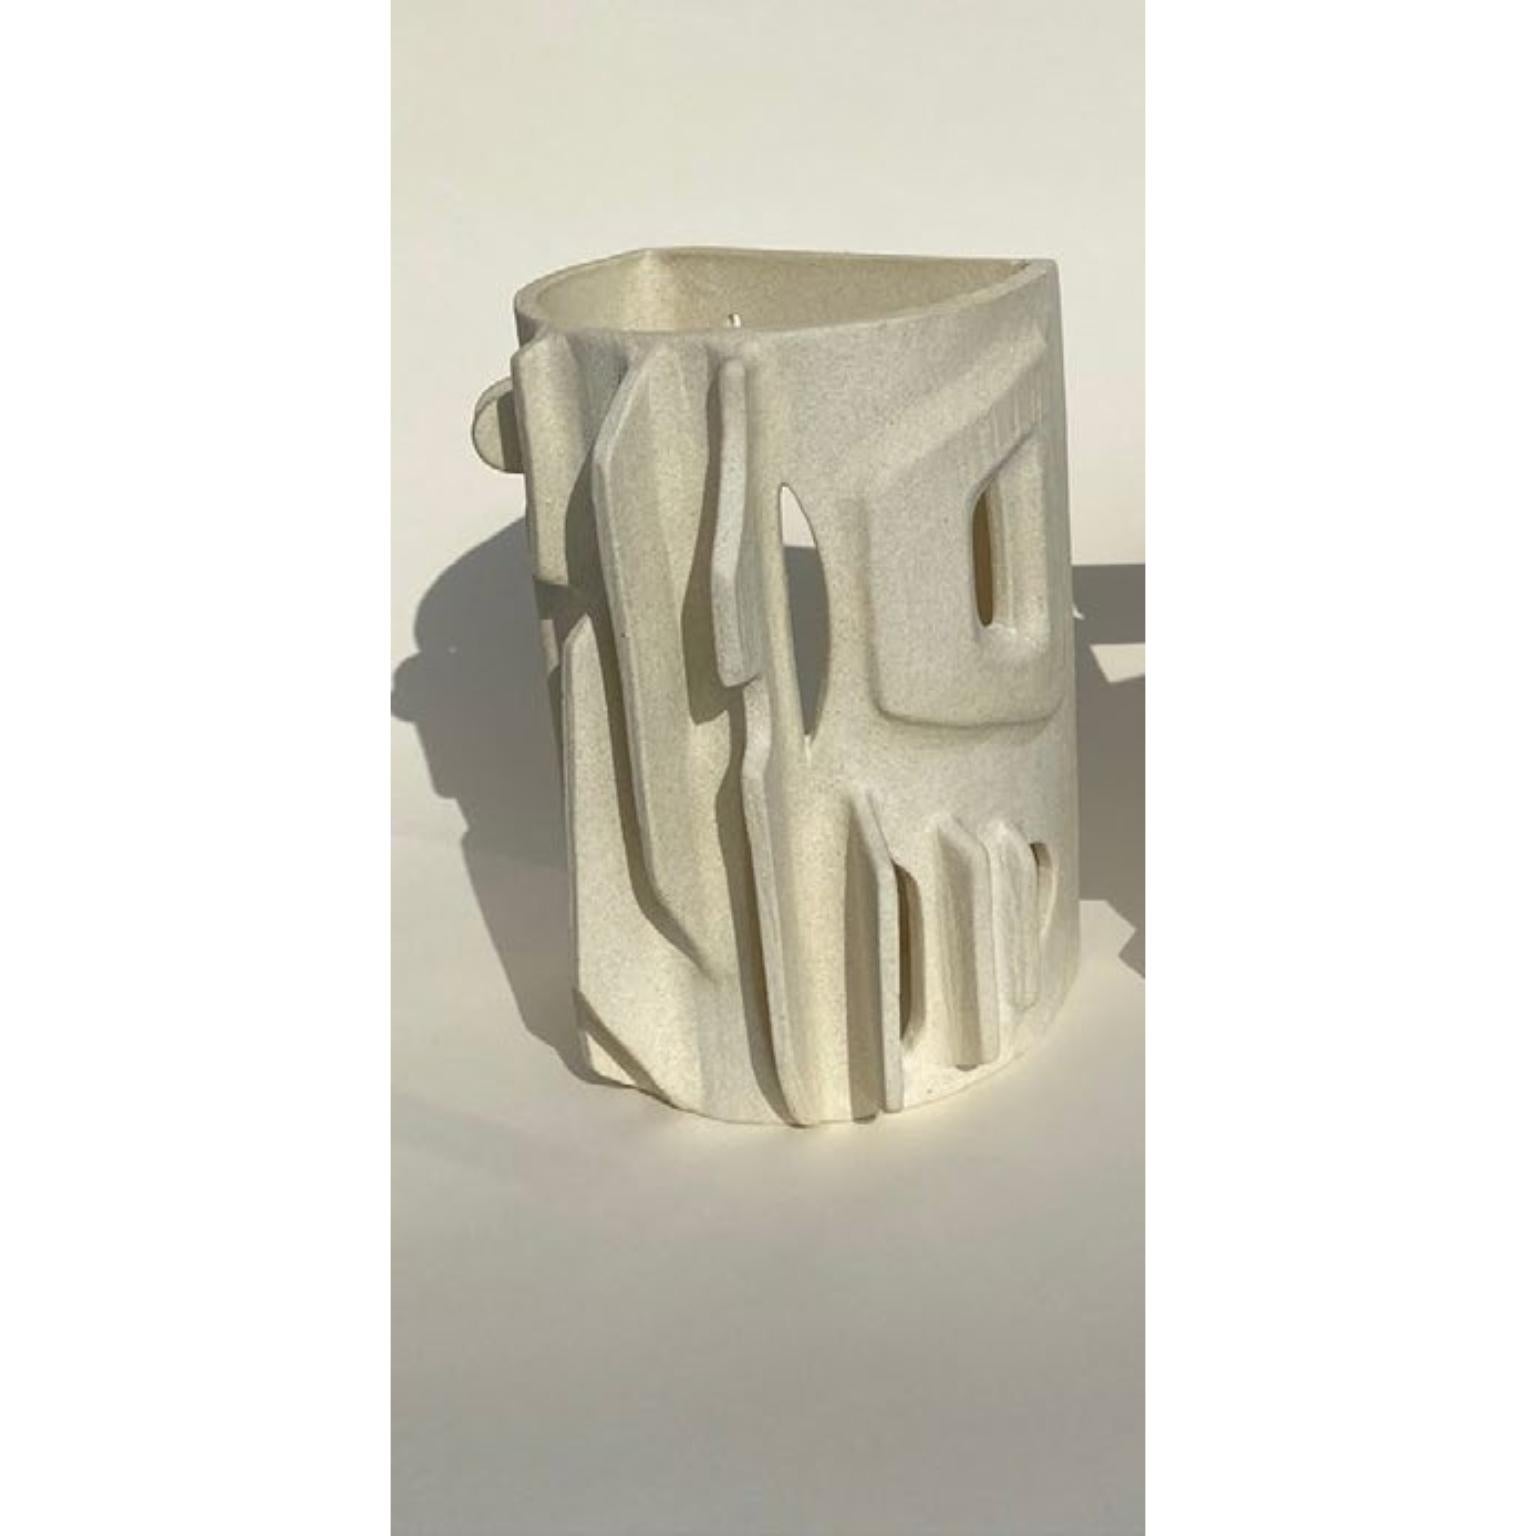 White sconce by Olivia Cognet
Materials: Ceramic
Dimensions: L 18 cm H 27 cm

Each of Olivia’s handmade creations is a unique work of art, the snapshot of a precious moment captured in a world of fast ‘everything’.
Since moving to Los Angeles